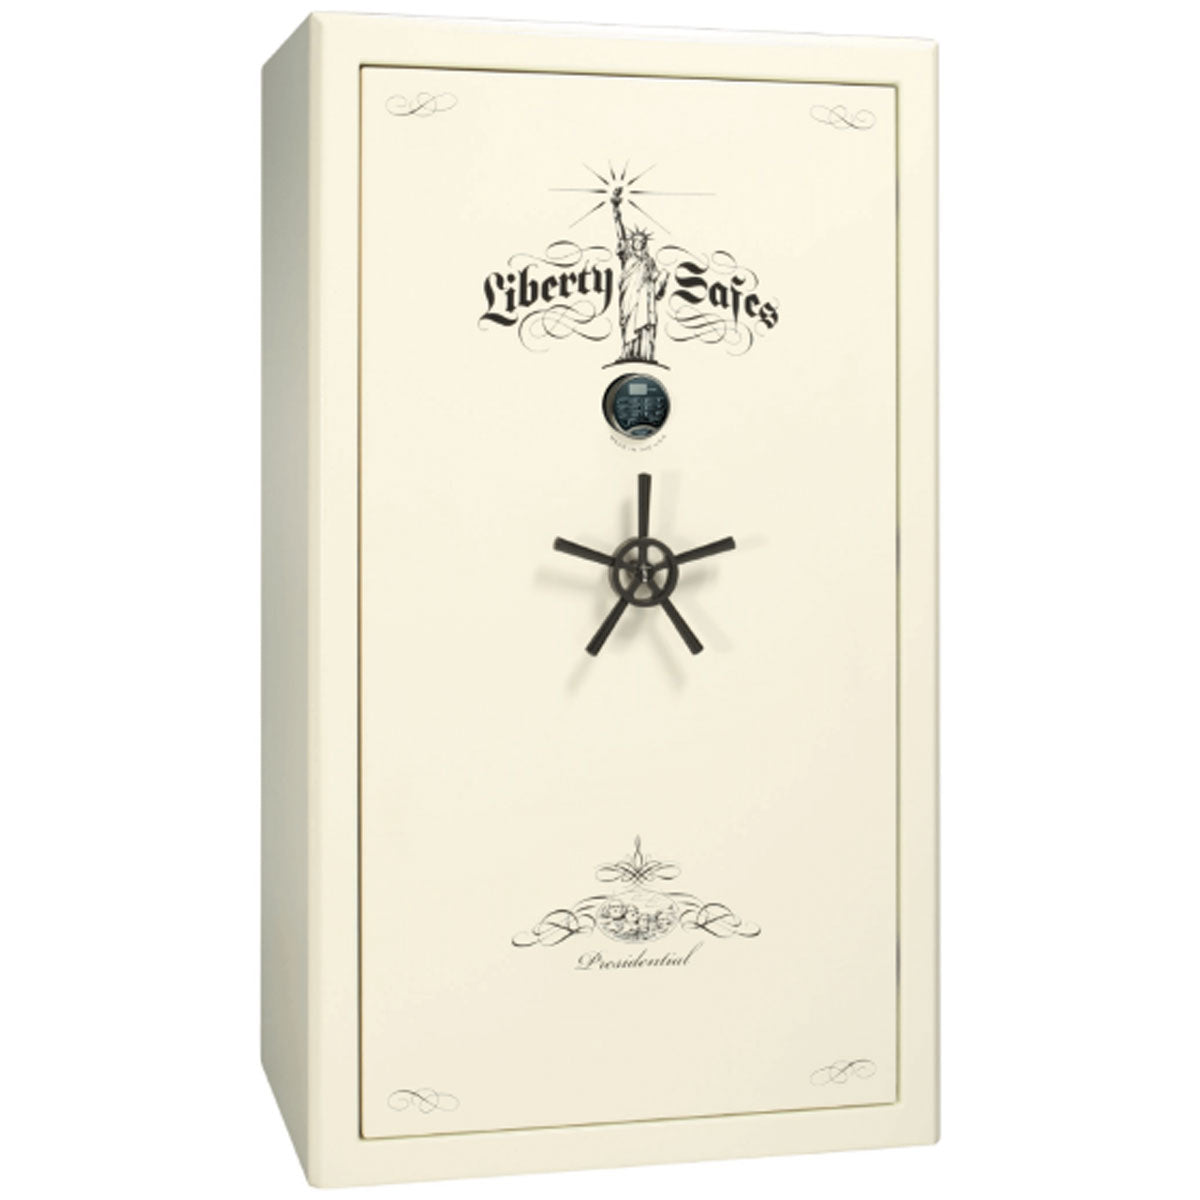 Liberty Safe Presidential 50 in White Gloss with Black Chrome Electronic Lock, closed door.